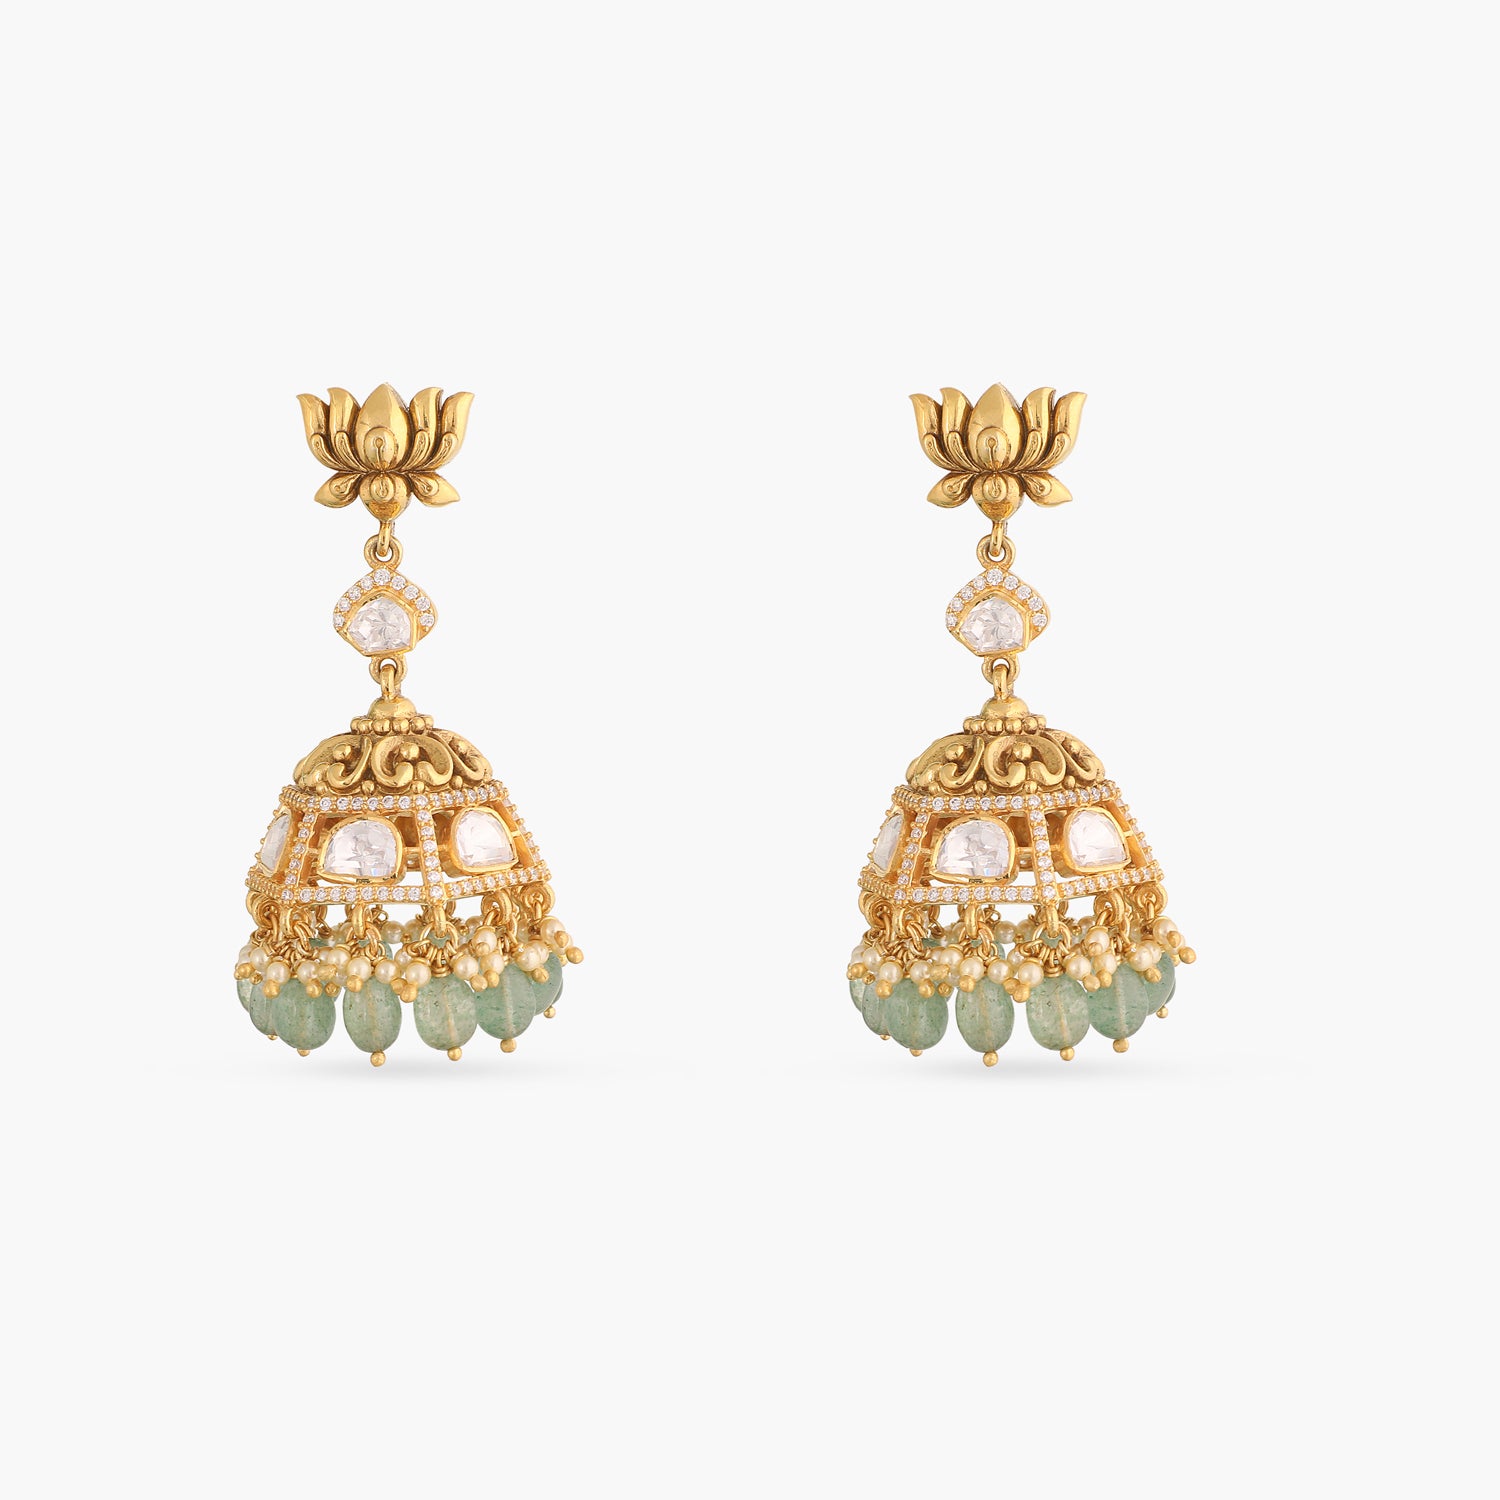 Golden Colour Earring Made in India. | BD Jewelers Bangladesh